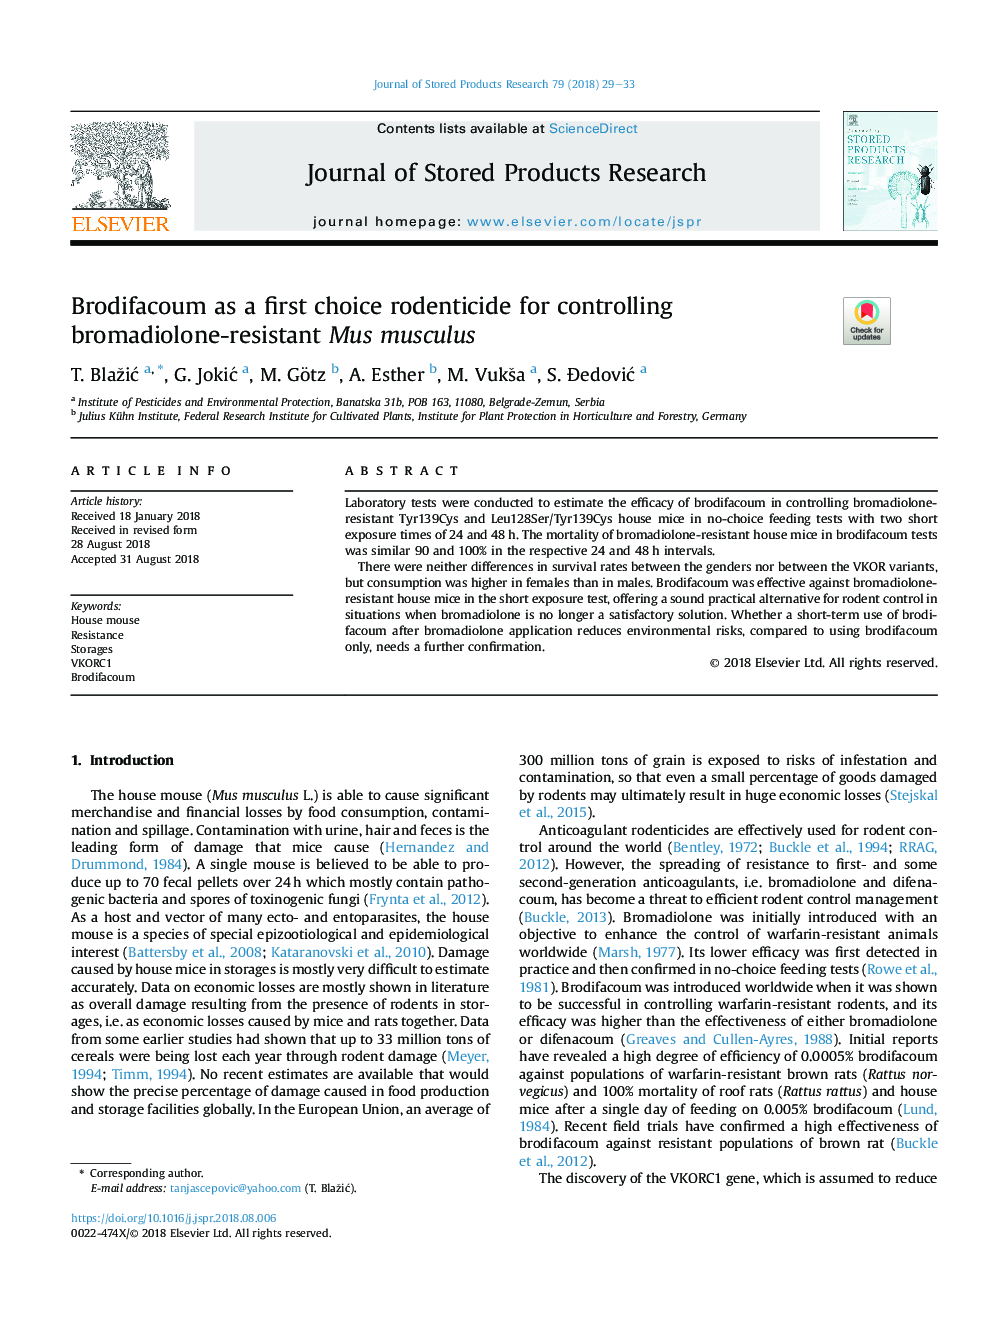 Brodifacoum as a first choice rodenticide for controlling bromadiolone-resistant Mus musculus